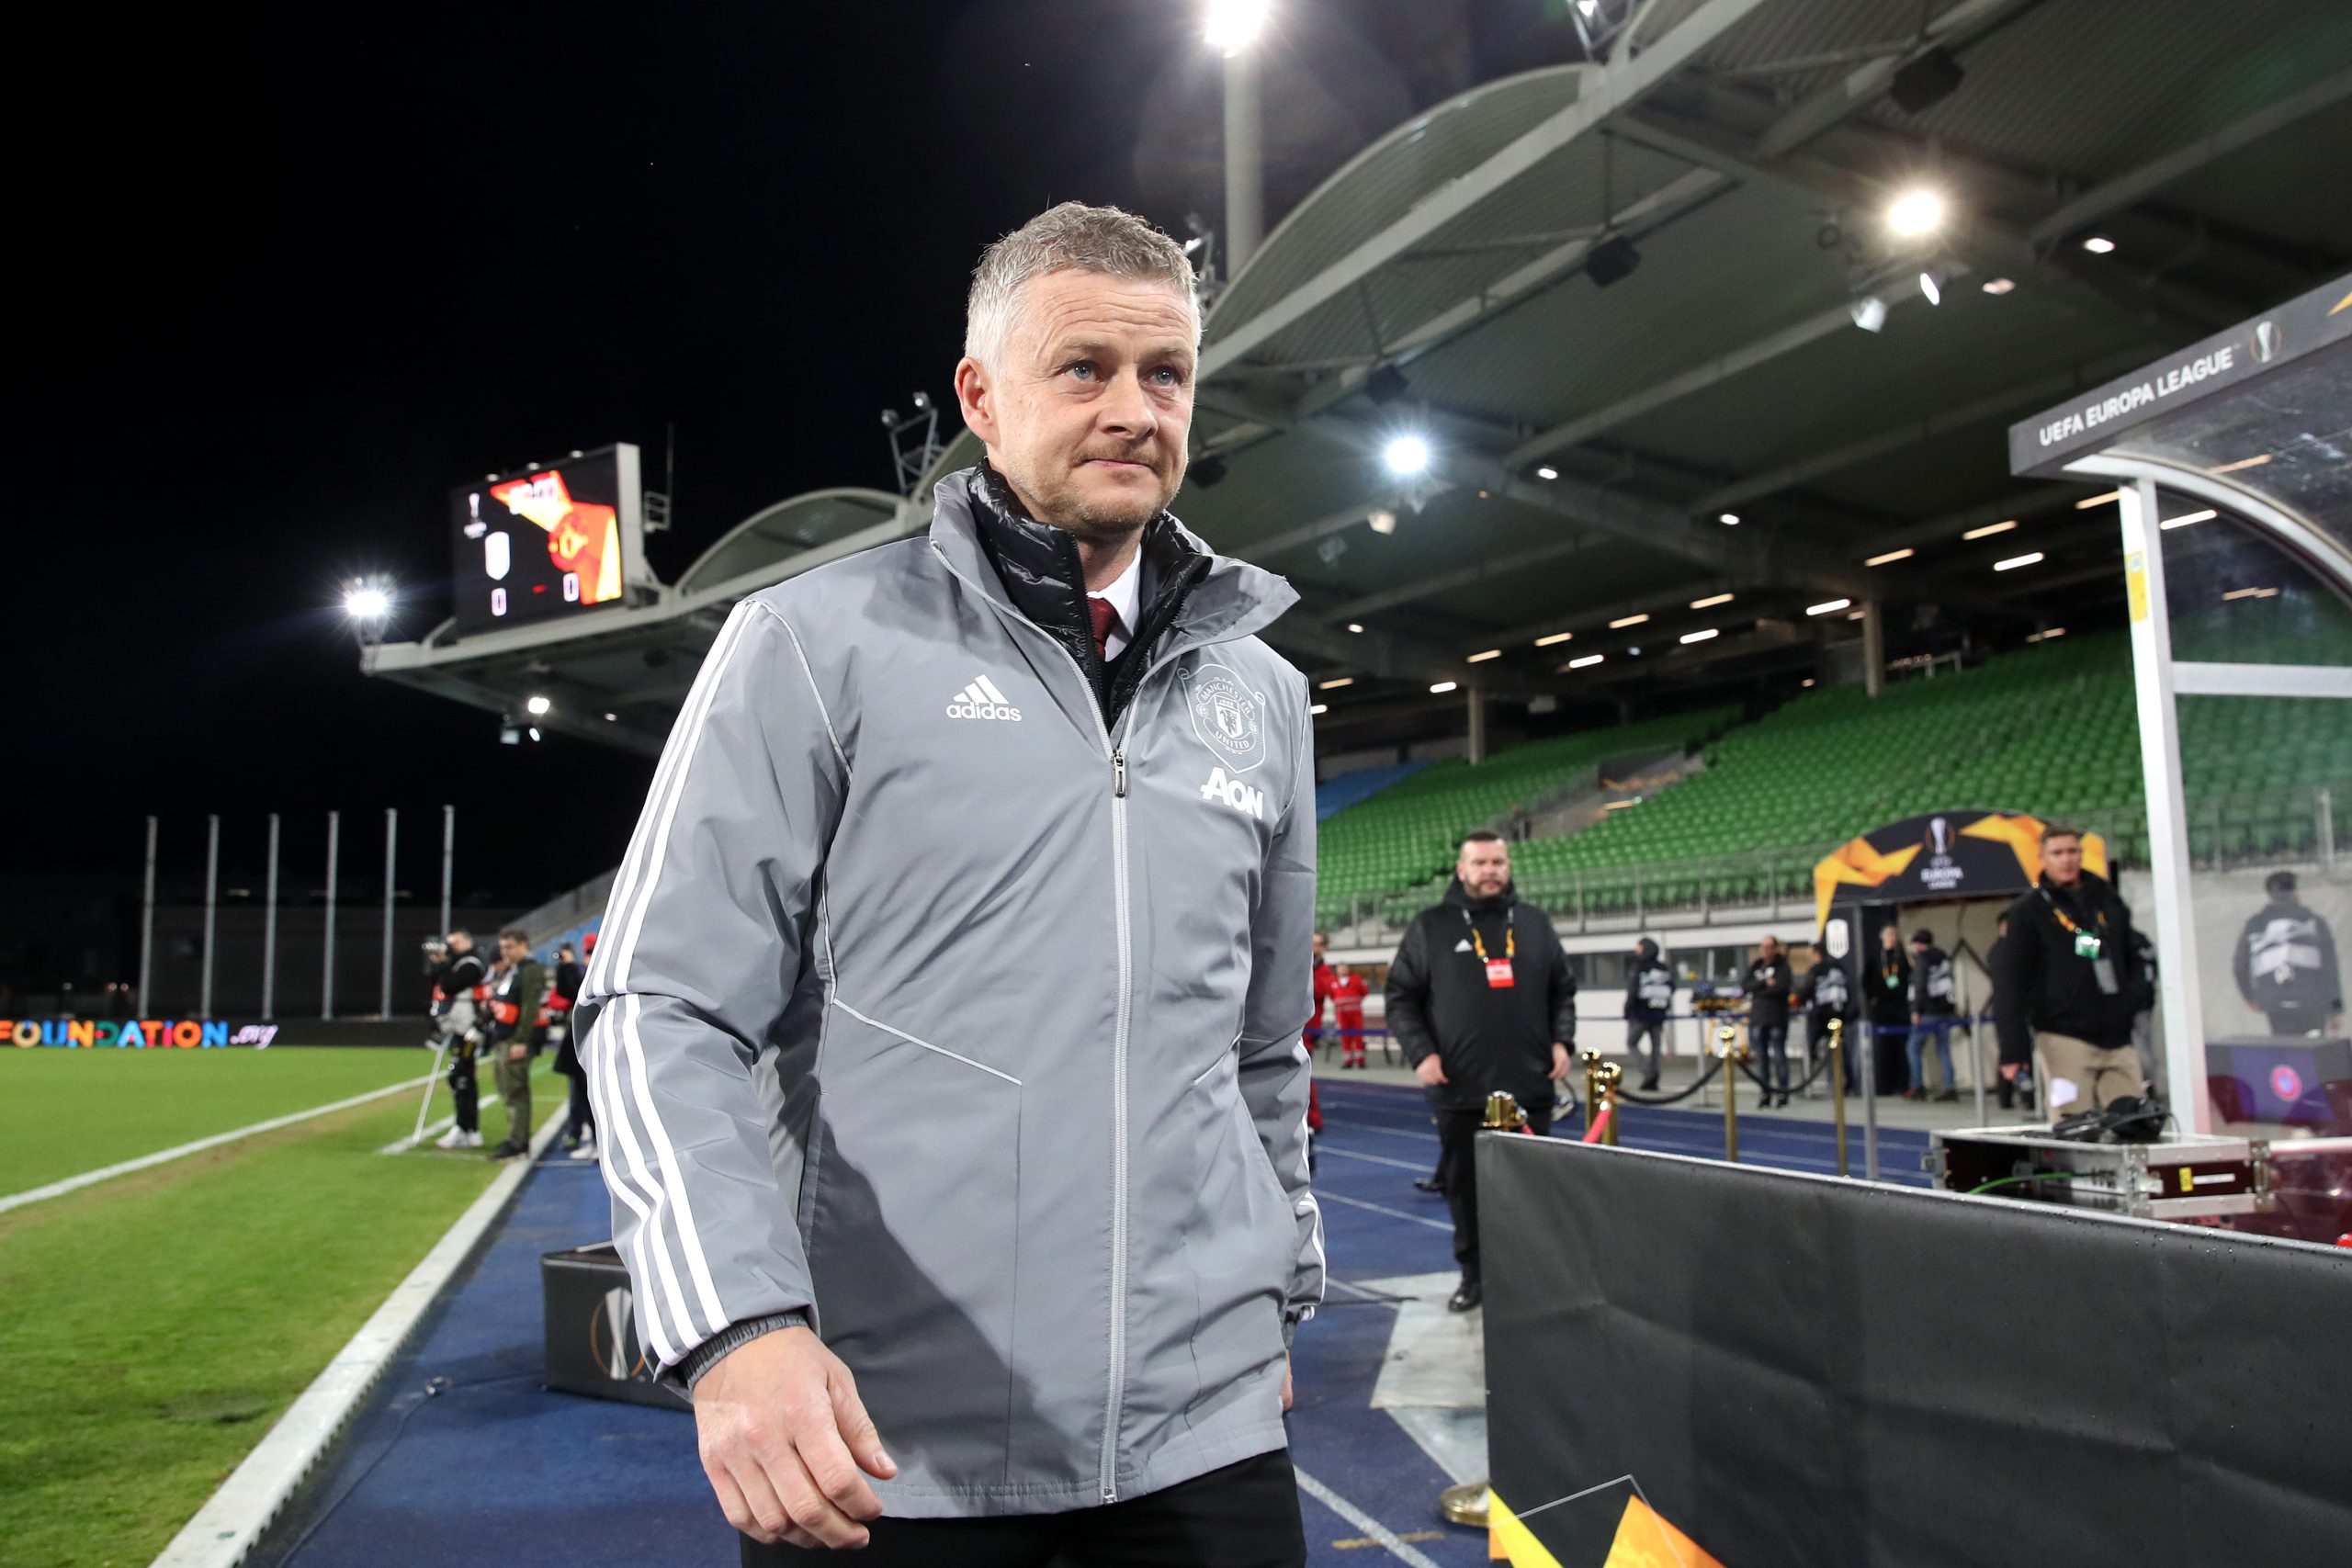 LINZ, AUSTRIA - MARCH 12: (FREE FOR EDITORIAL USE) In this handout image provided by UEFA, Ole Gunnar Solskjaer, Manager of Manchester United walks to his seat prior to the UEFA Europa League round of 16 first leg match between LASK and Manchester United at Linzer Stadion on March 12, 2020 in Linz, Austria. The match is played behind closed doors as a precaution against the spread of COVID-19 (Coronavirus).  (Photo by UEFA - Handout/UEFA via Getty Images )